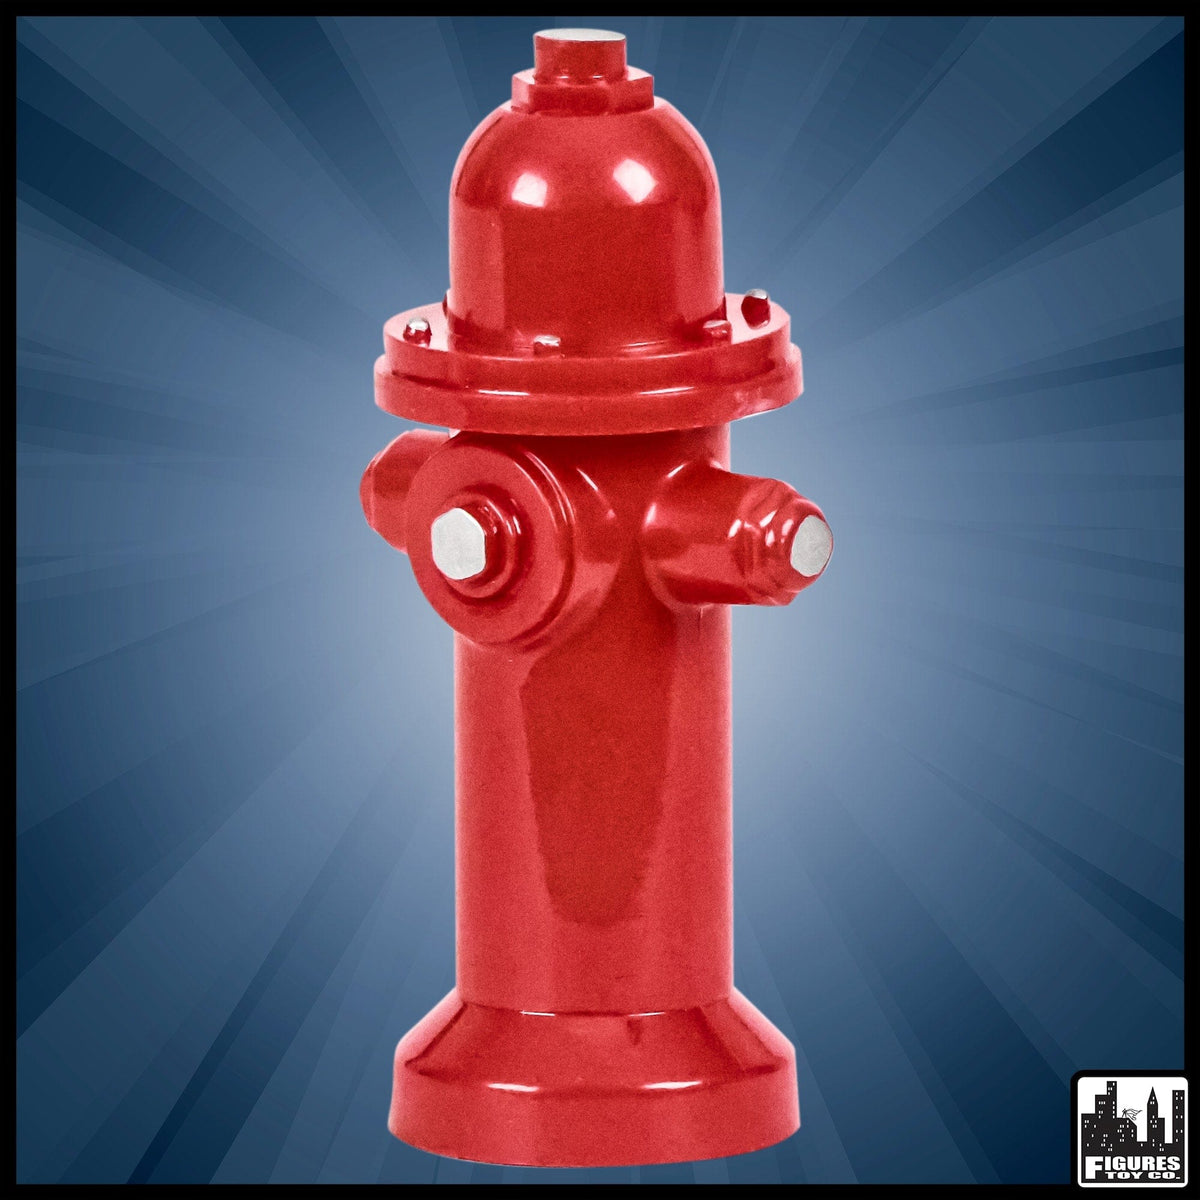 Set of 3 Red Fire Hydrants for WWE Wrestling Action Figures